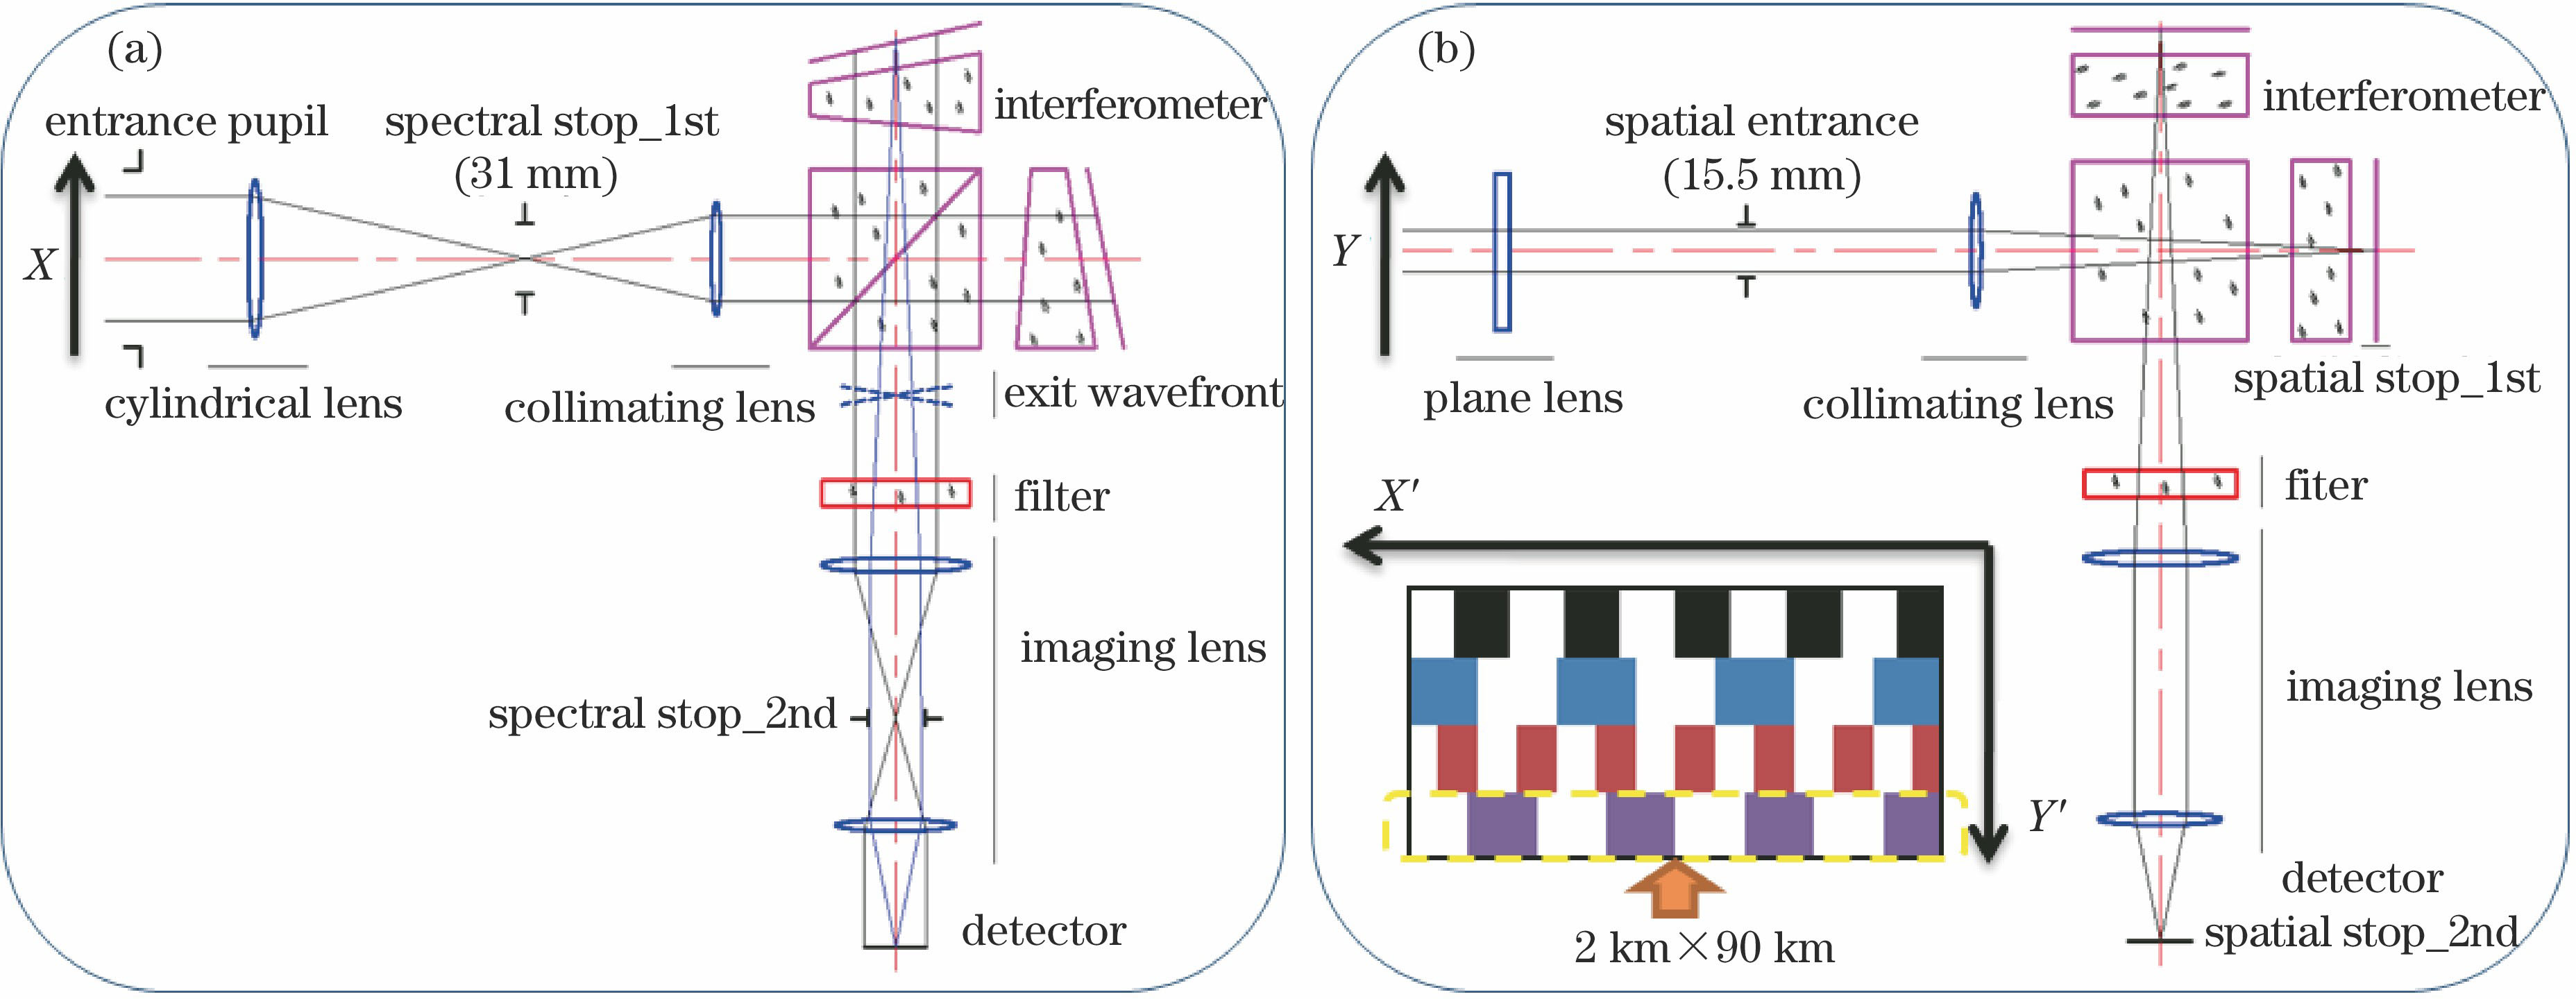 (a) Schematic of principle of optics in dispersive cross section and (b) schematic of principle of optics in 1-D imaging direction